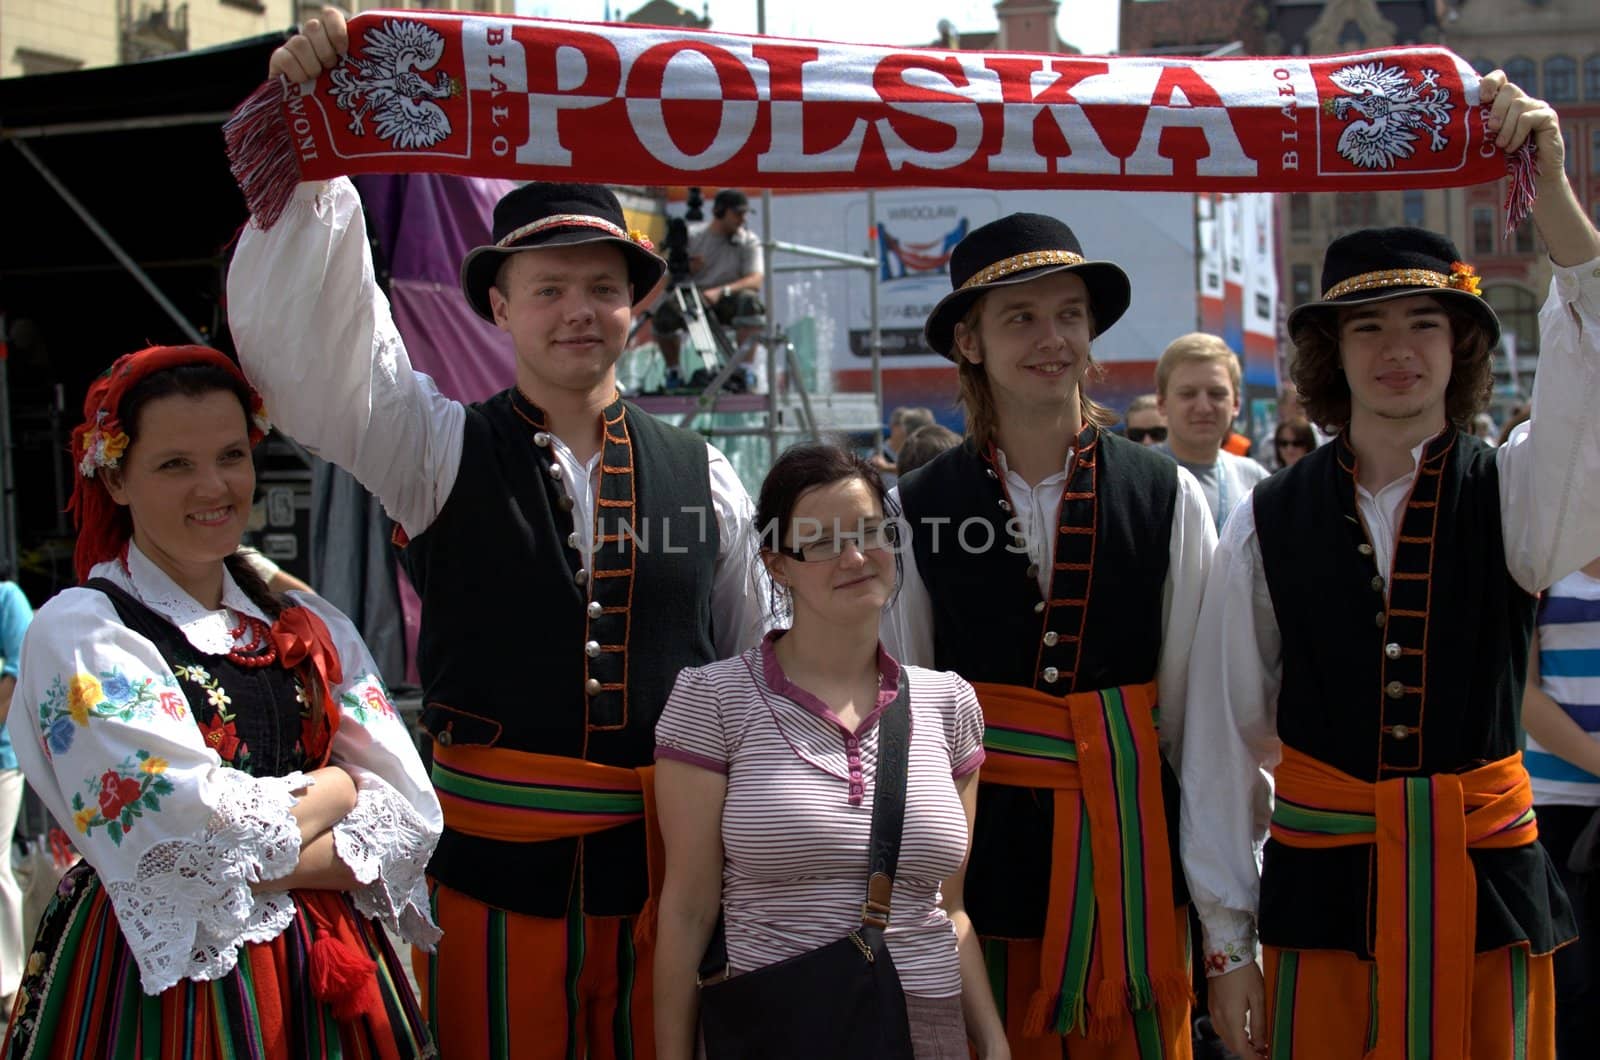 WROCLAW, POLAND - JUNE 15:  Members of Folk Dance group "Wroclaw" visit Euro 2012 fanzone. Dancers take photo with football fan on June 15, 2012 in Wroclaw.  